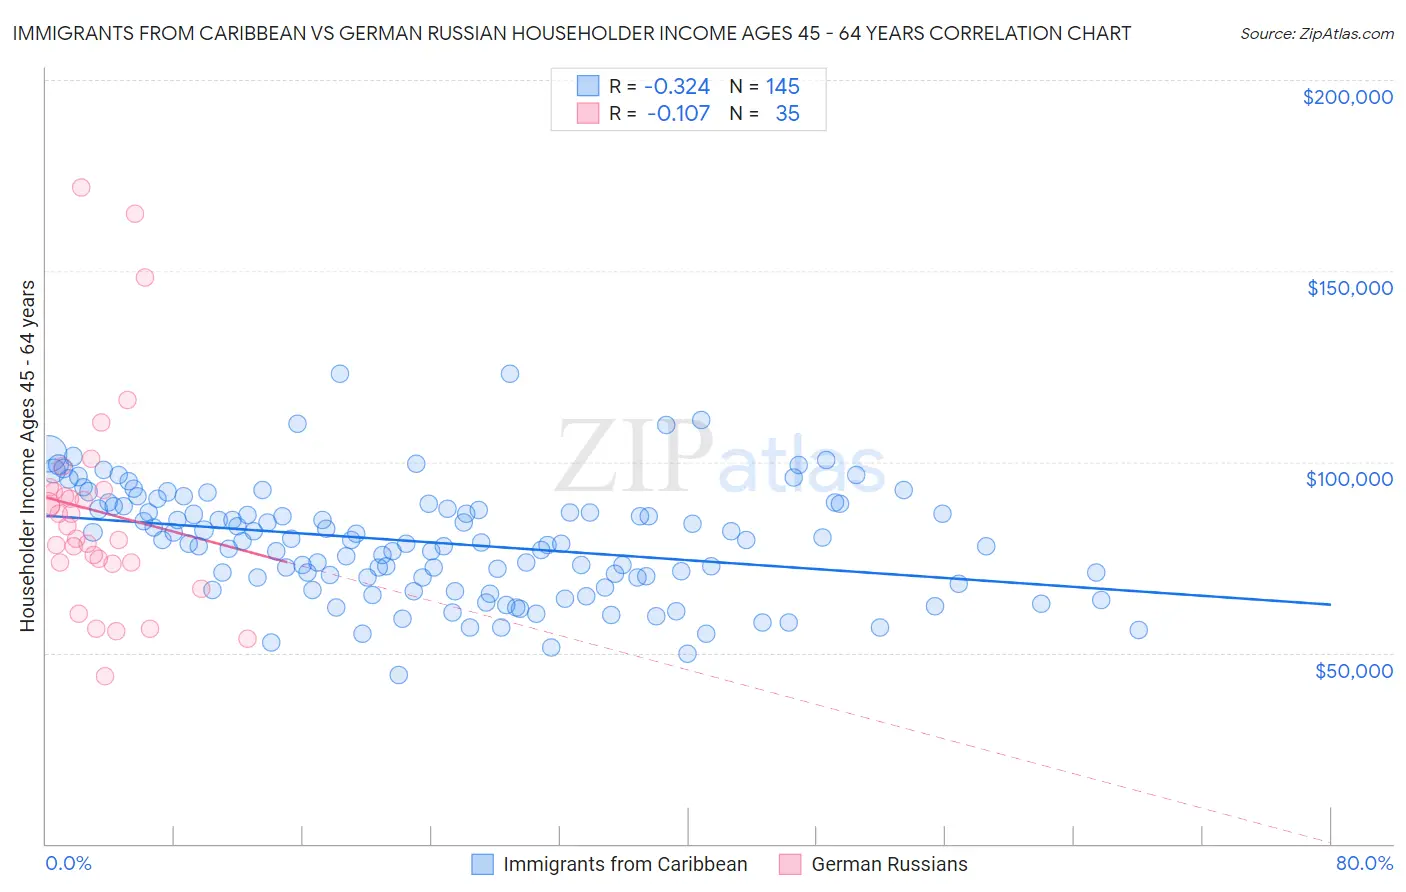 Immigrants from Caribbean vs German Russian Householder Income Ages 45 - 64 years